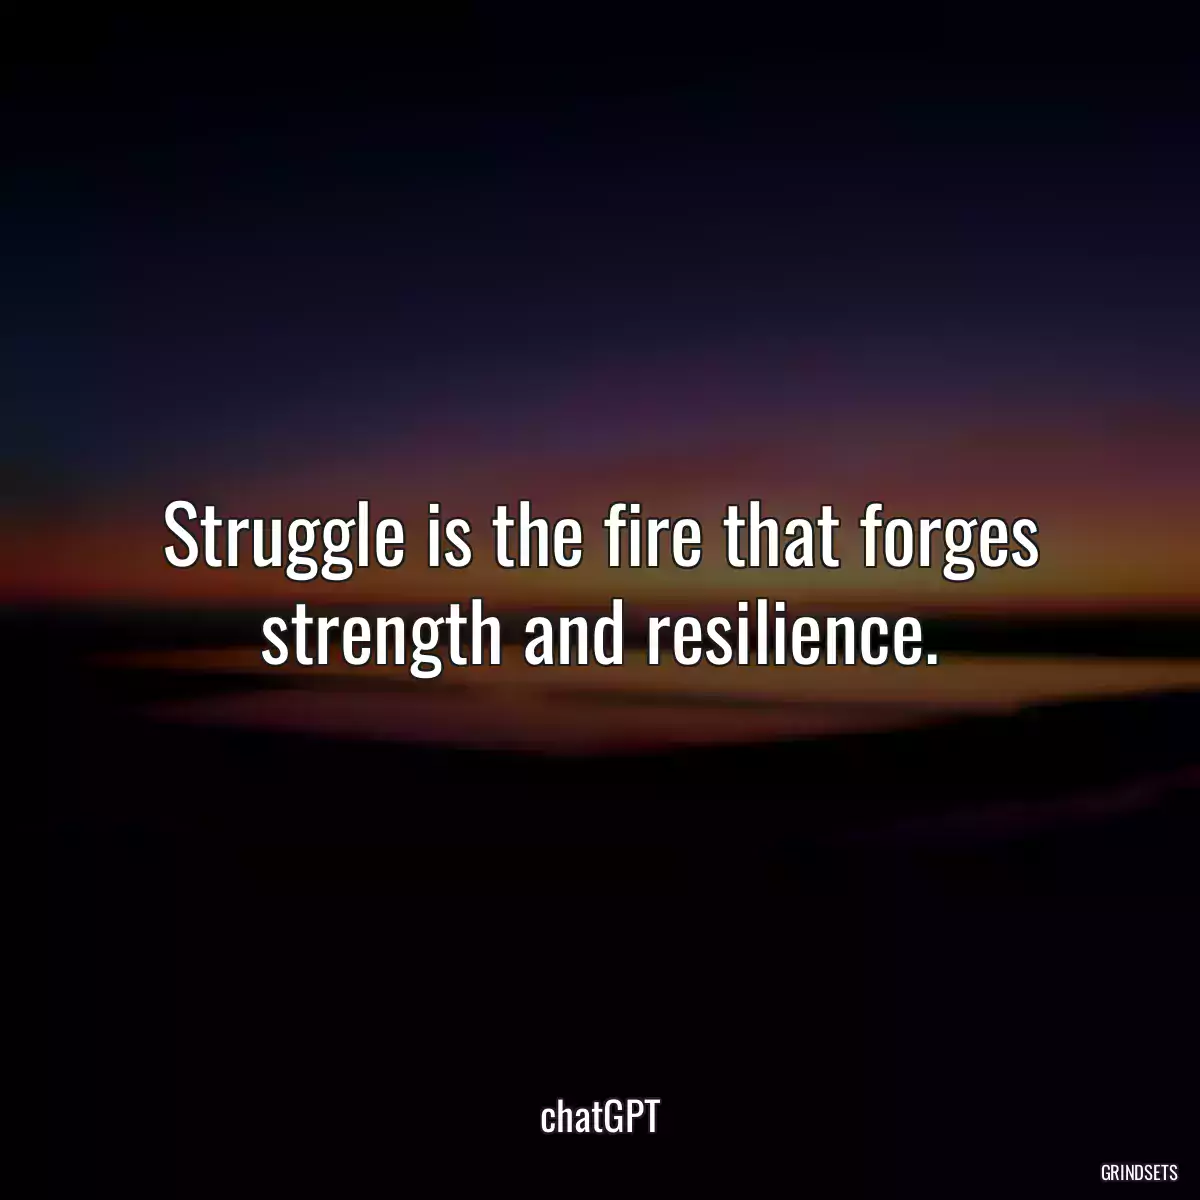 Struggle is the fire that forges strength and resilience.